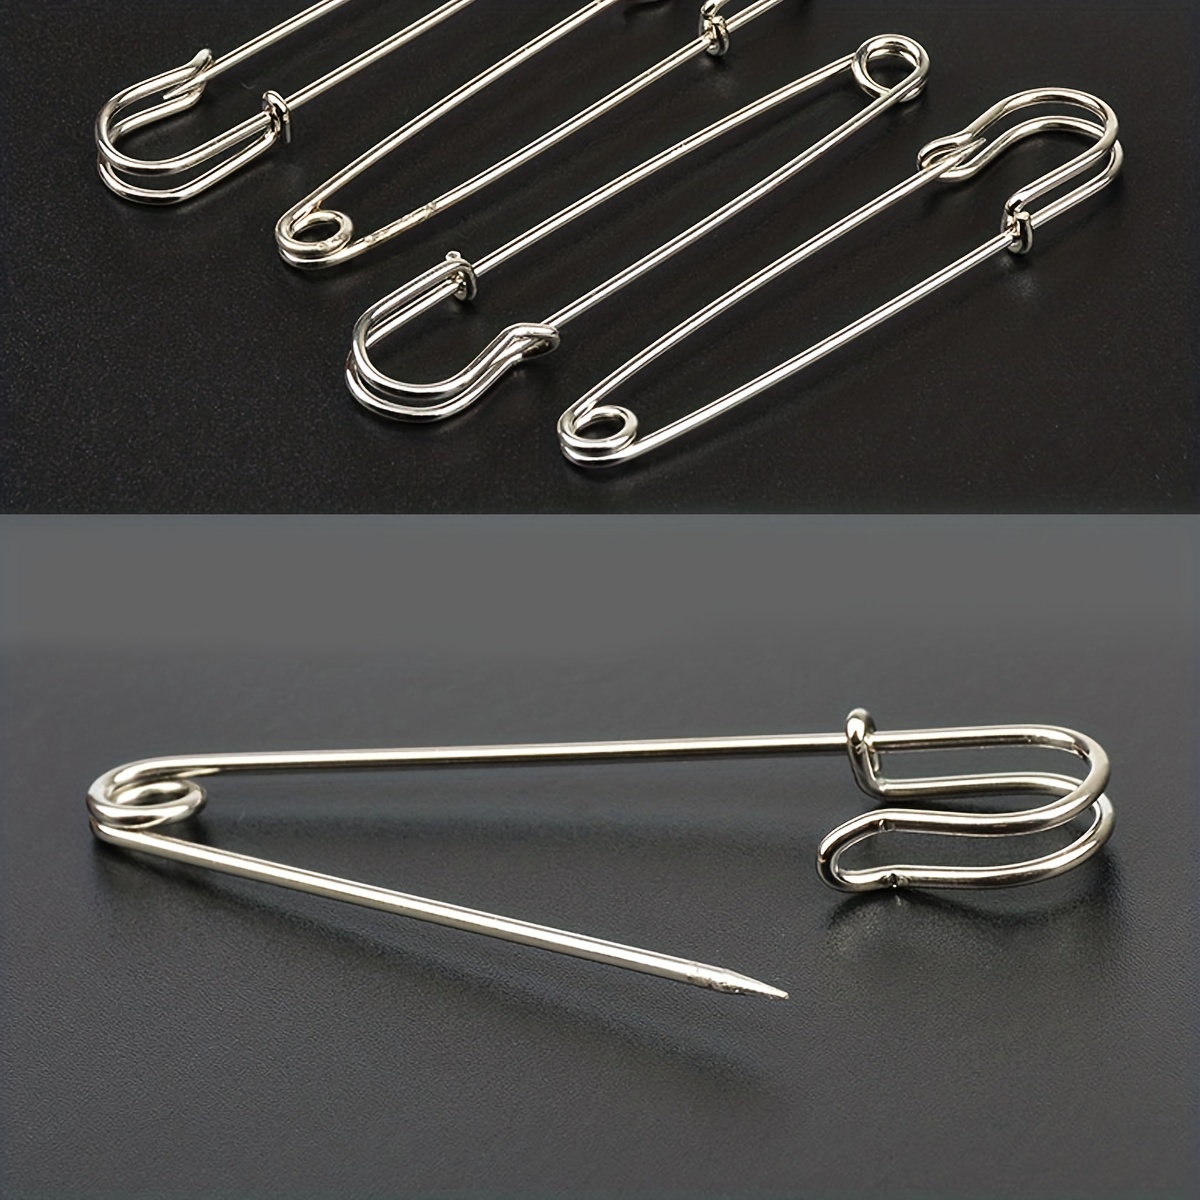 Giant Safety Pins - Ace Props and Events